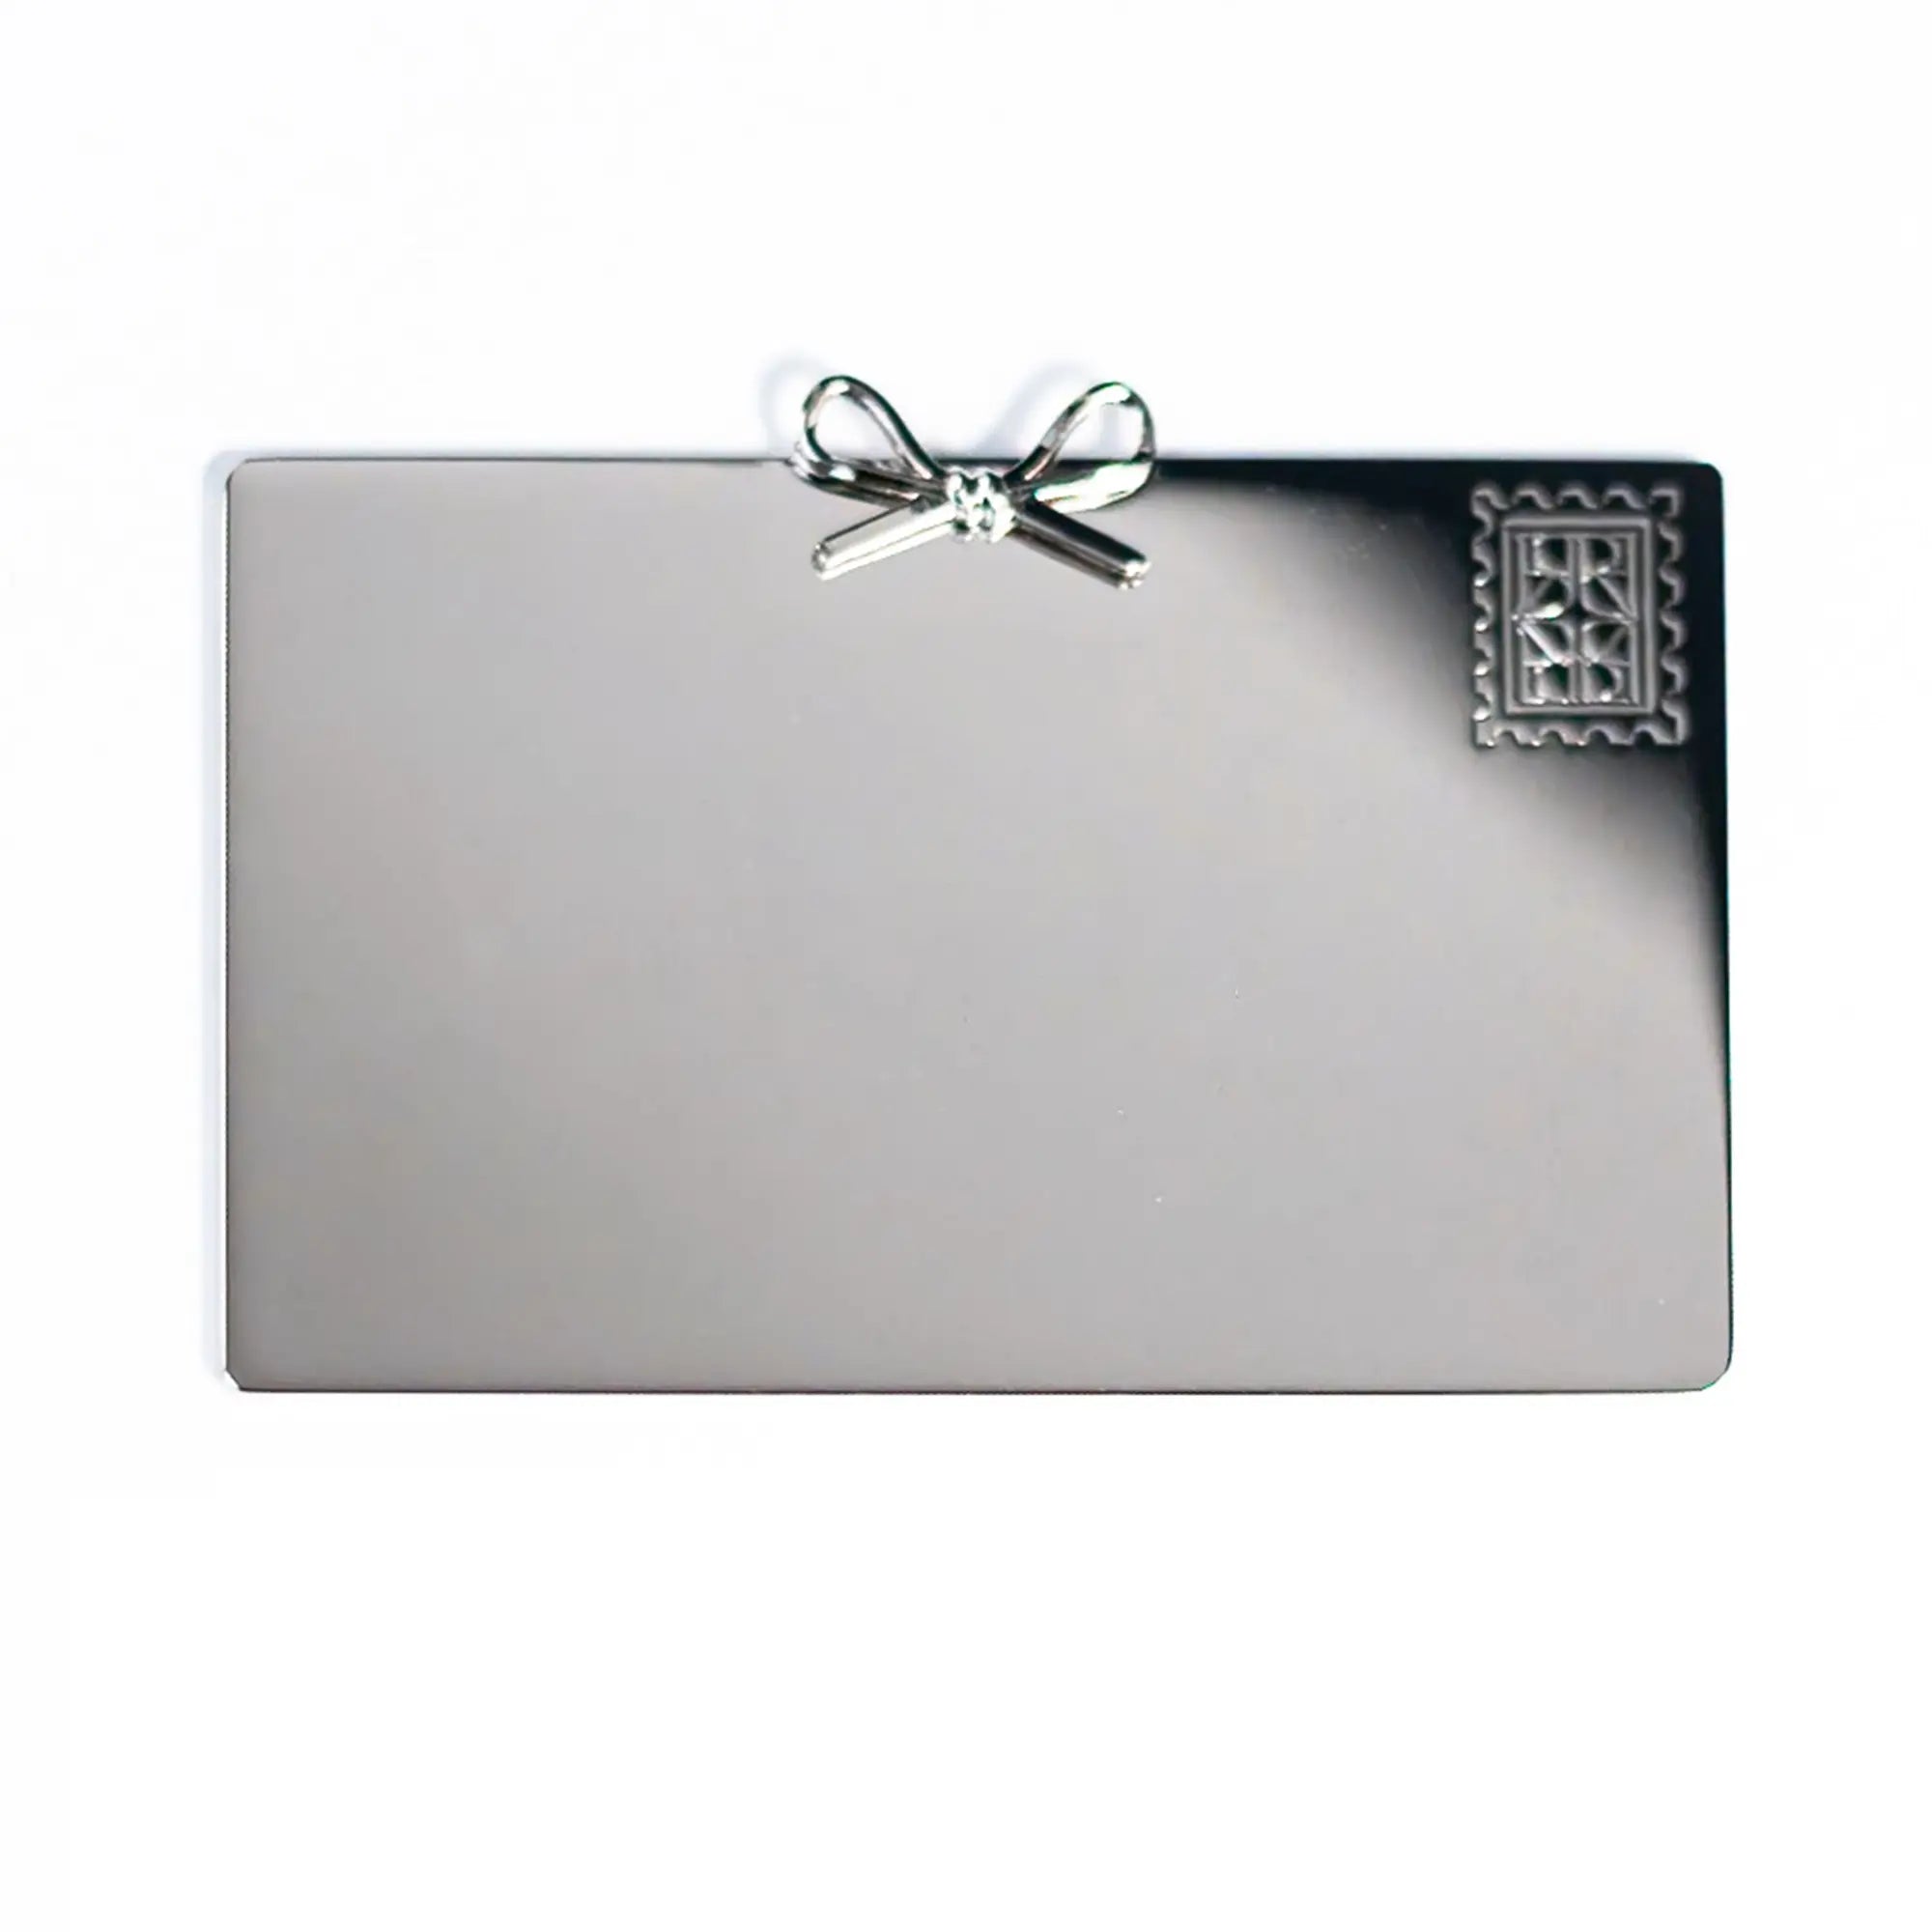 Blank silver gift card with a decorative bow on a white background, featuring a Personalized Plaque Sentiment Engraving from The Bella Rosa Collection.